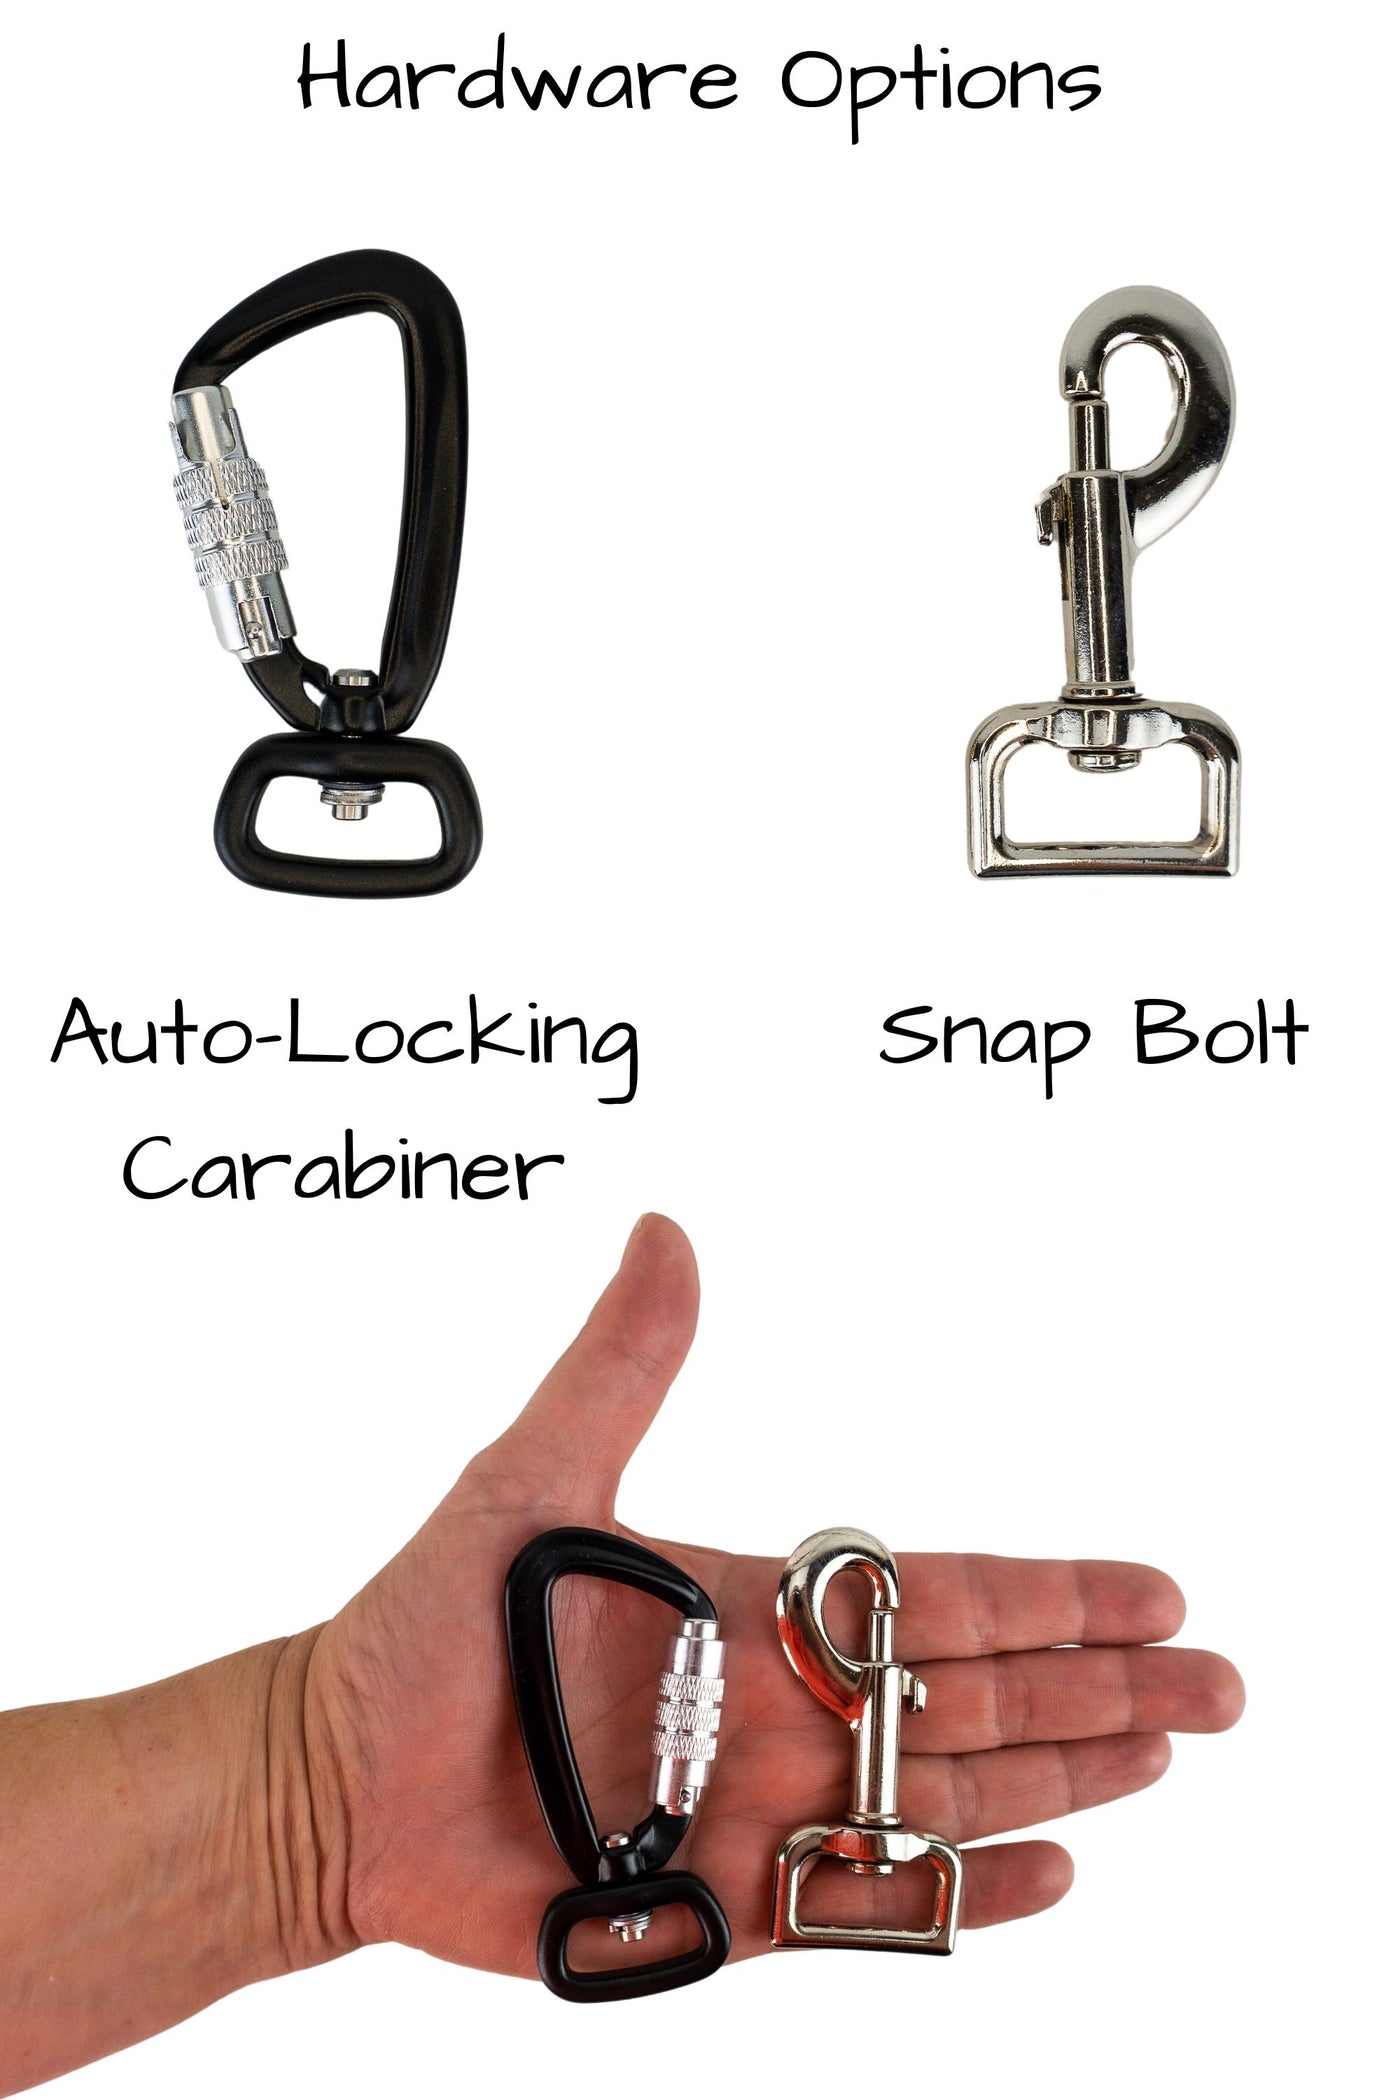 Two hardware options are available for the adjustable no pull leashes, choose from a standard swivel snap bolt or an auto locking carabiner for both ends of the leash, the clip on handle will be a swivel snap bolt.